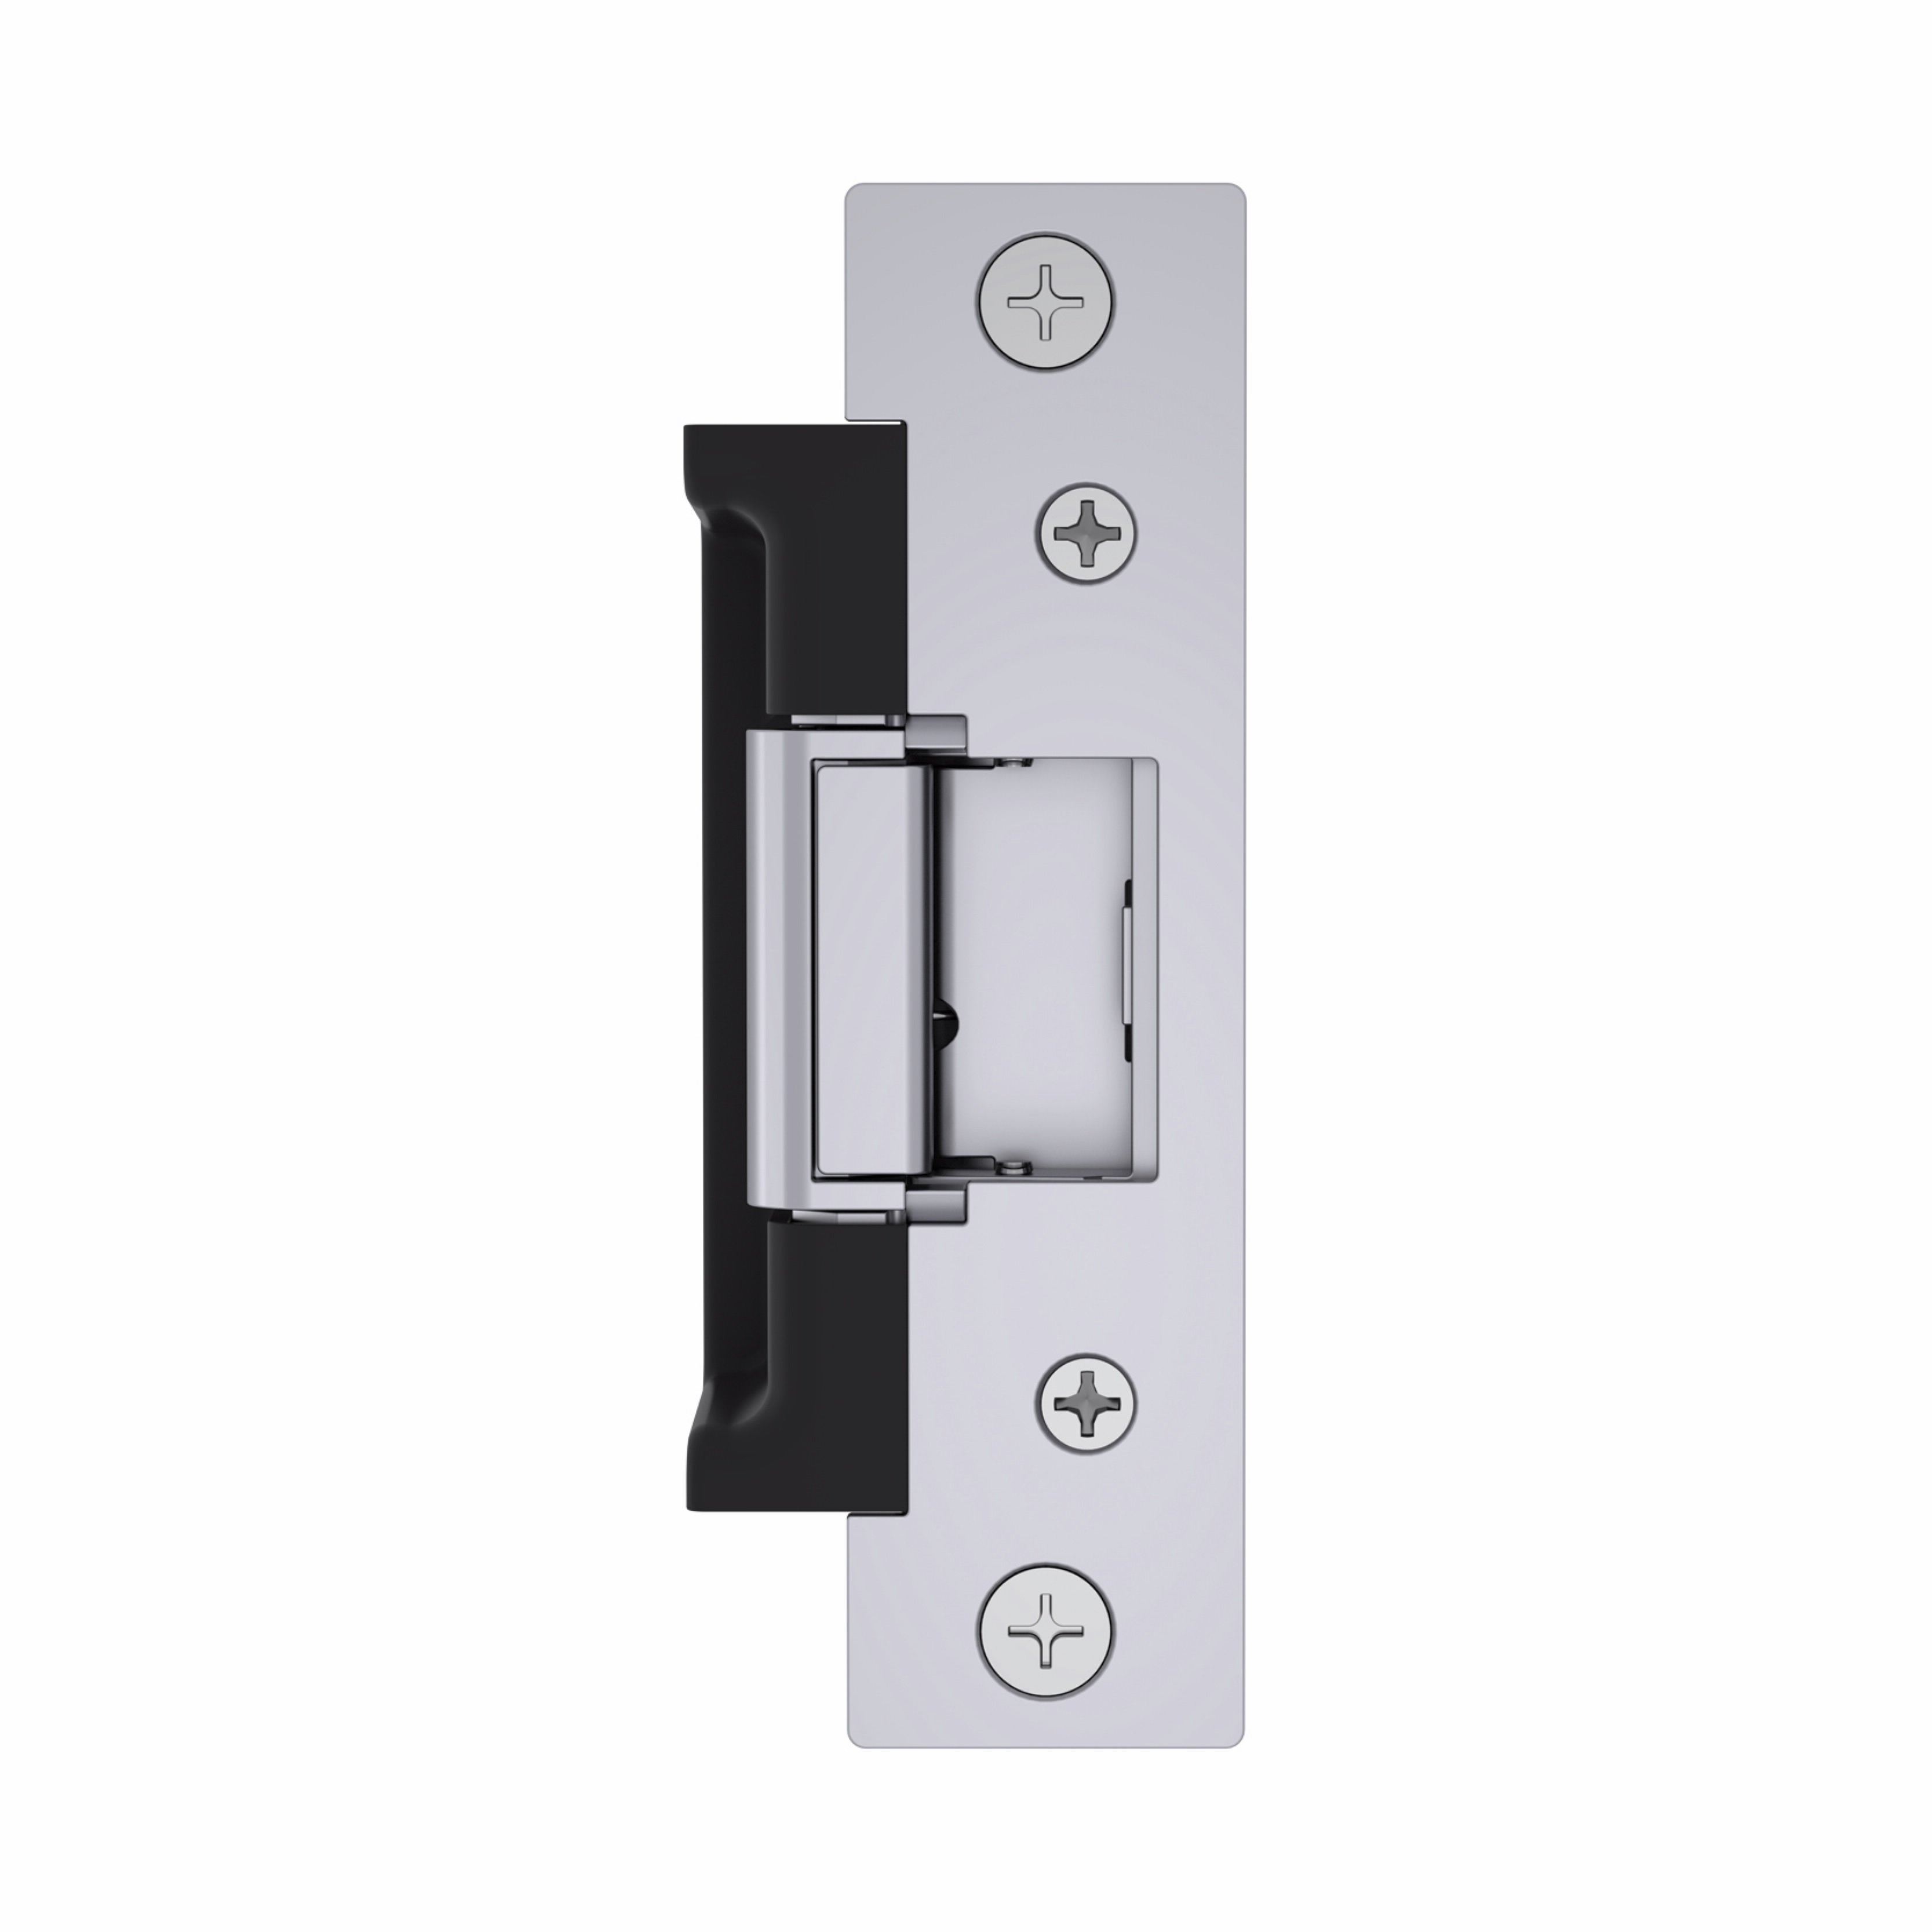 HES Assa Abloy 801A Faceplate Option Kit x 32D with mounting tabs and shims. 